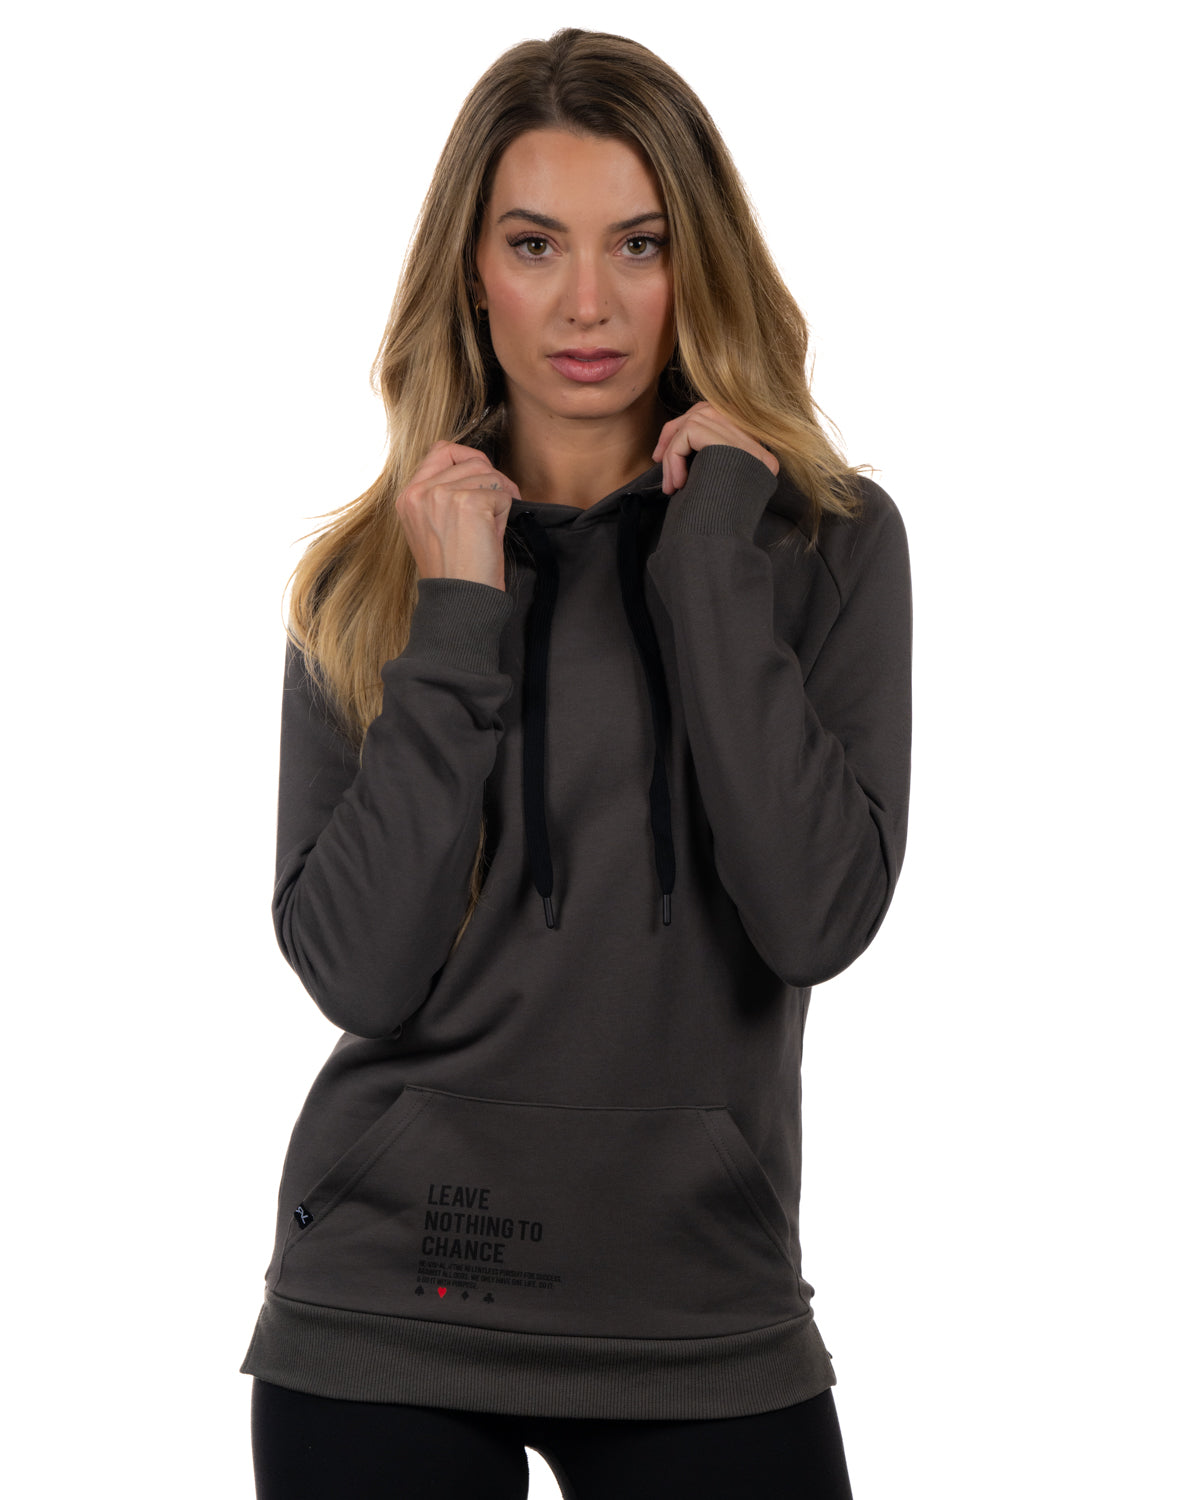 All-In - Hoodie - Graphite/Black 2XL